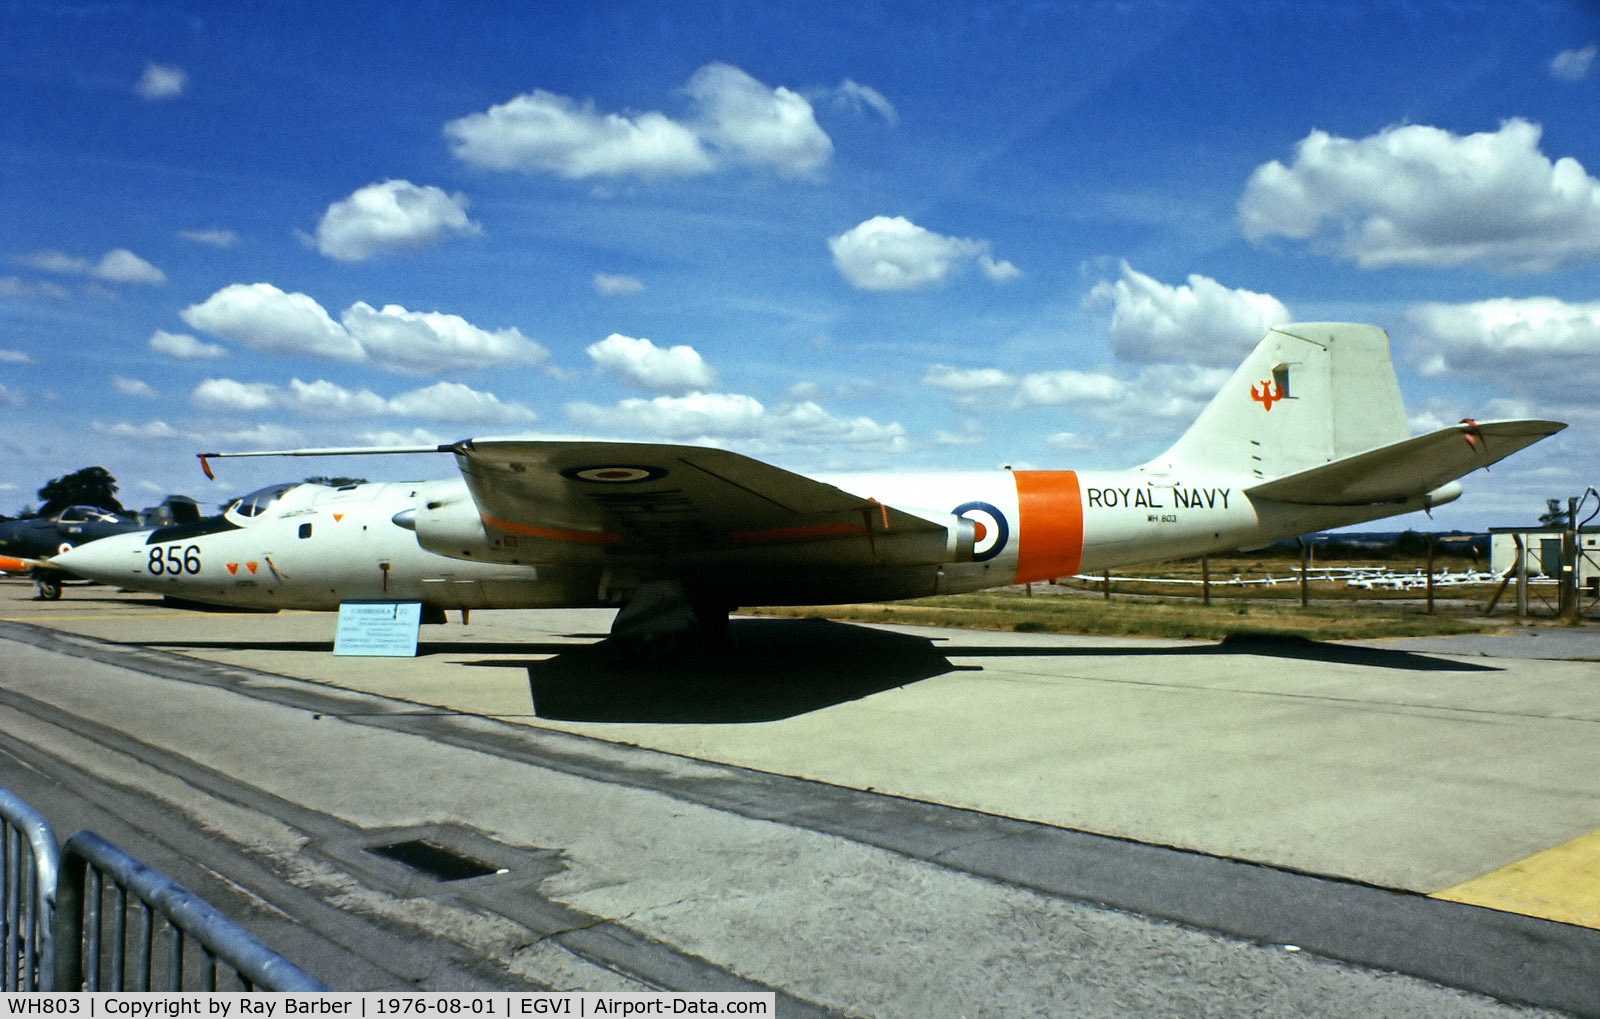 WH803, 1954 English Electric Canberra T.22 C/N EEP71305, WH803   English Electric Canberra T.22 [71305] (Royal Navy) RAF Greenham Common~G 01/08/1976. From a slide.